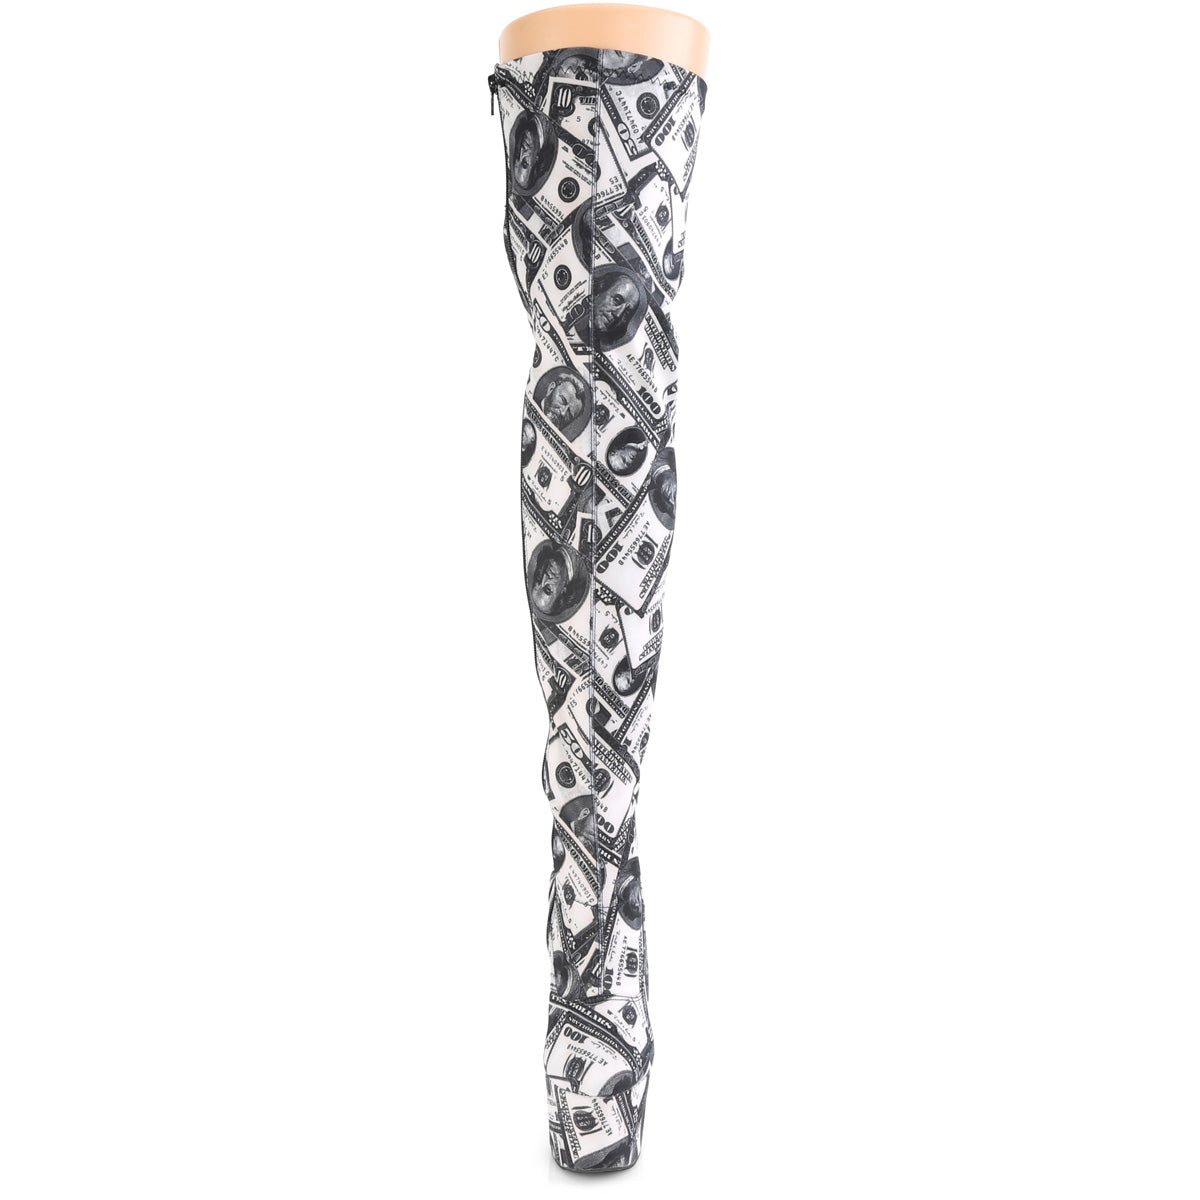 ADORE-3000DP 7" Heel White & Black Pole Dancing Thigh Highs-Pleaser- Sexy Shoes Alternative Footwear